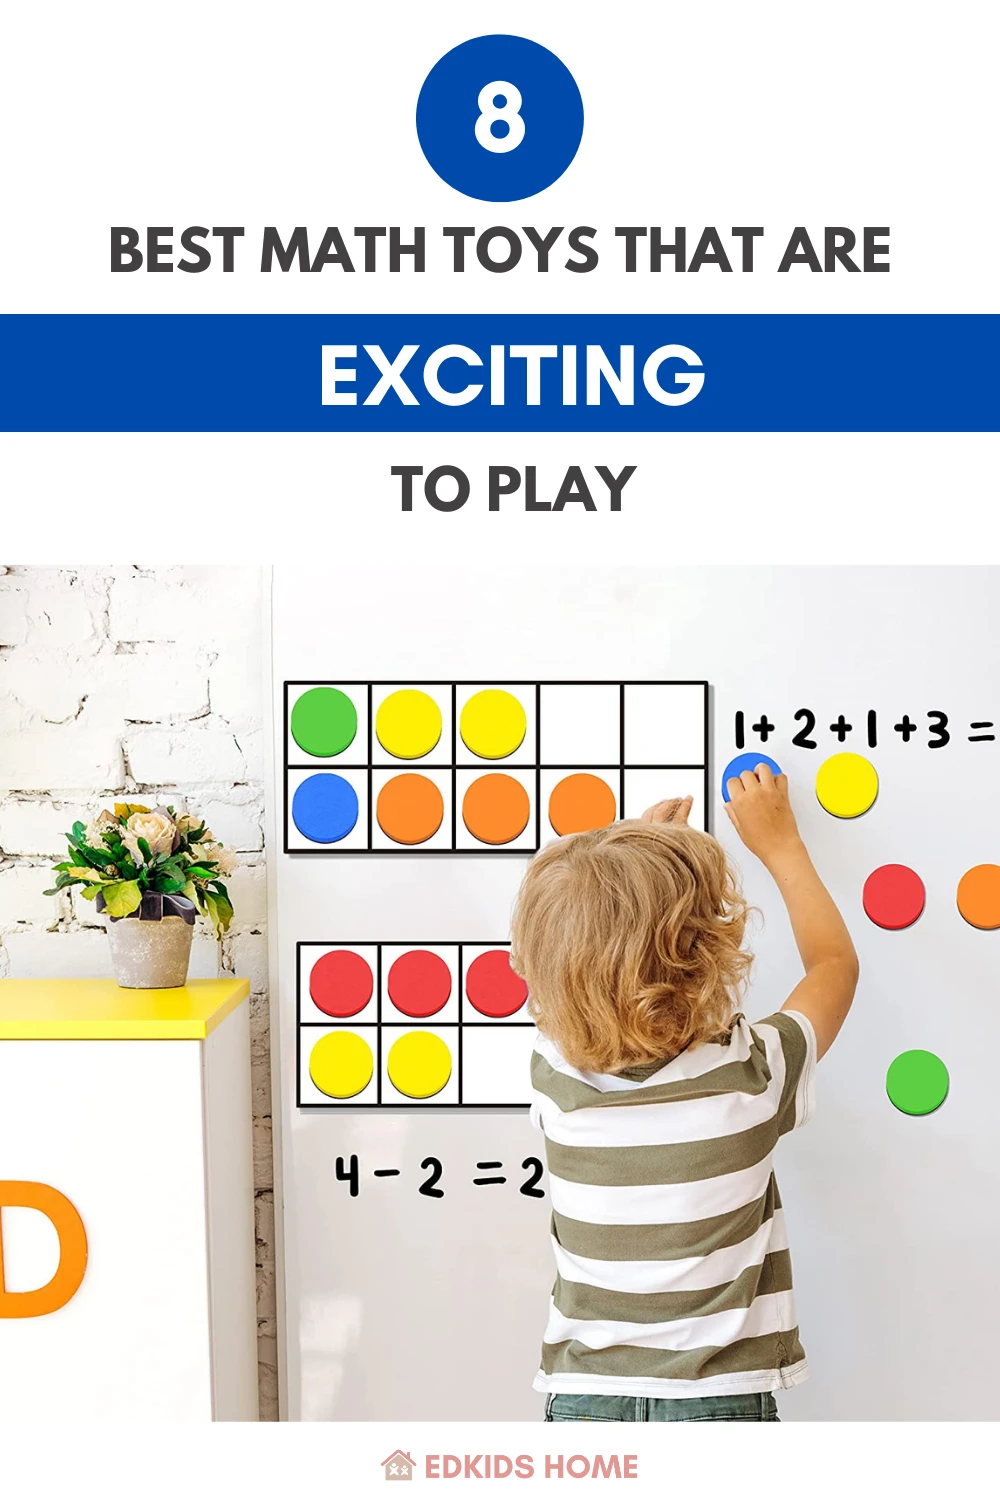 8 Best Math Toys That Are Exciting to Play